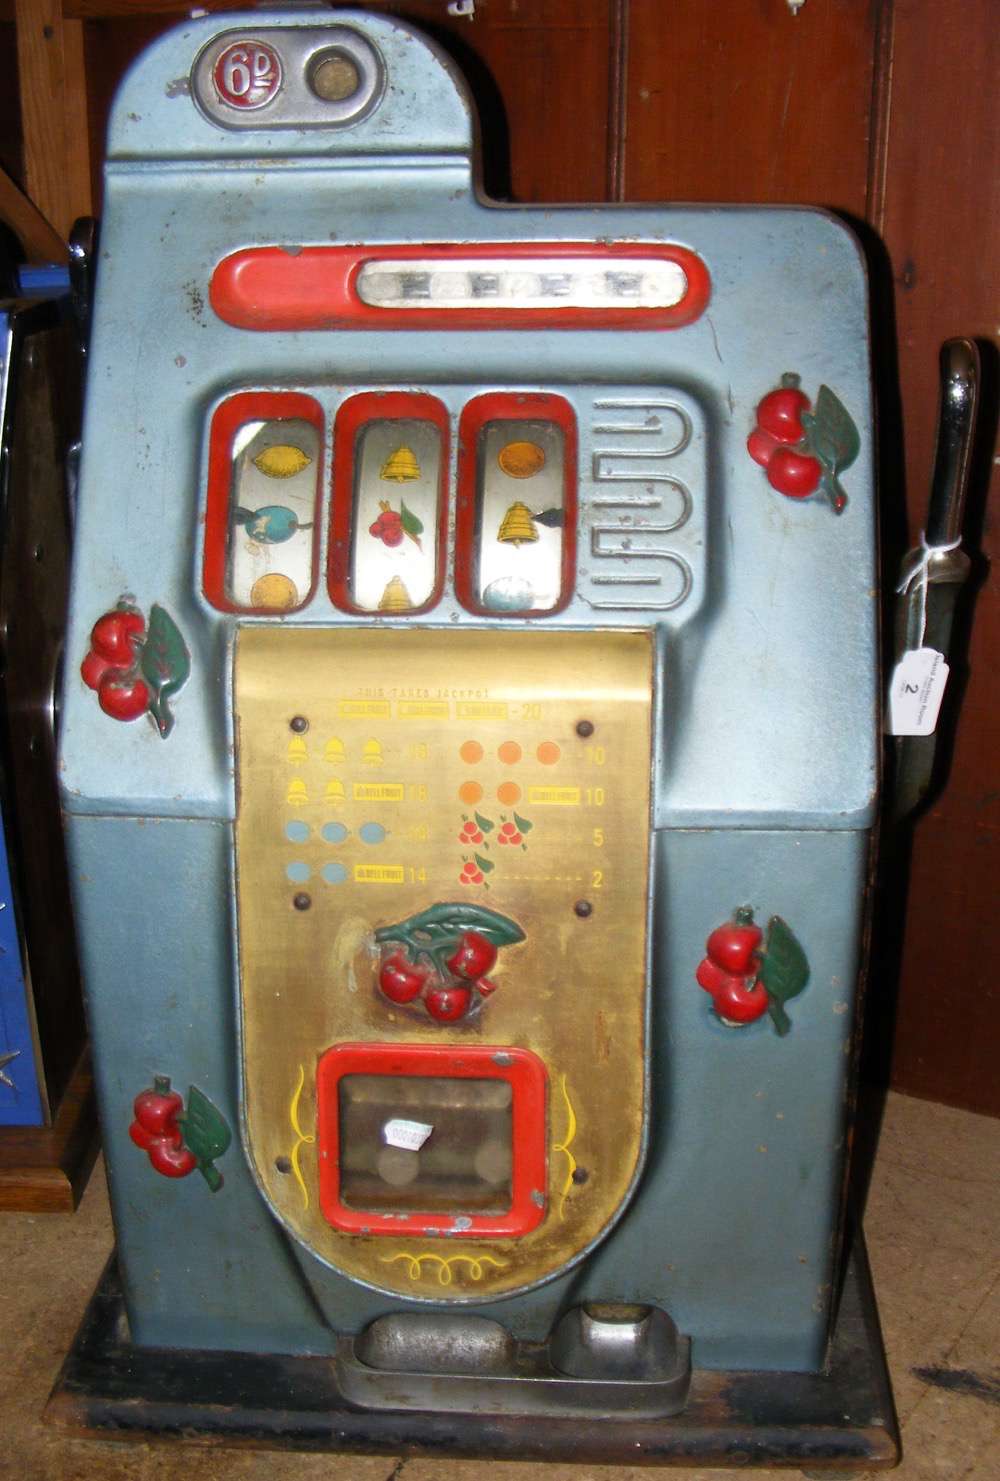 An early 6D "One Arm Bandit" fruit machine